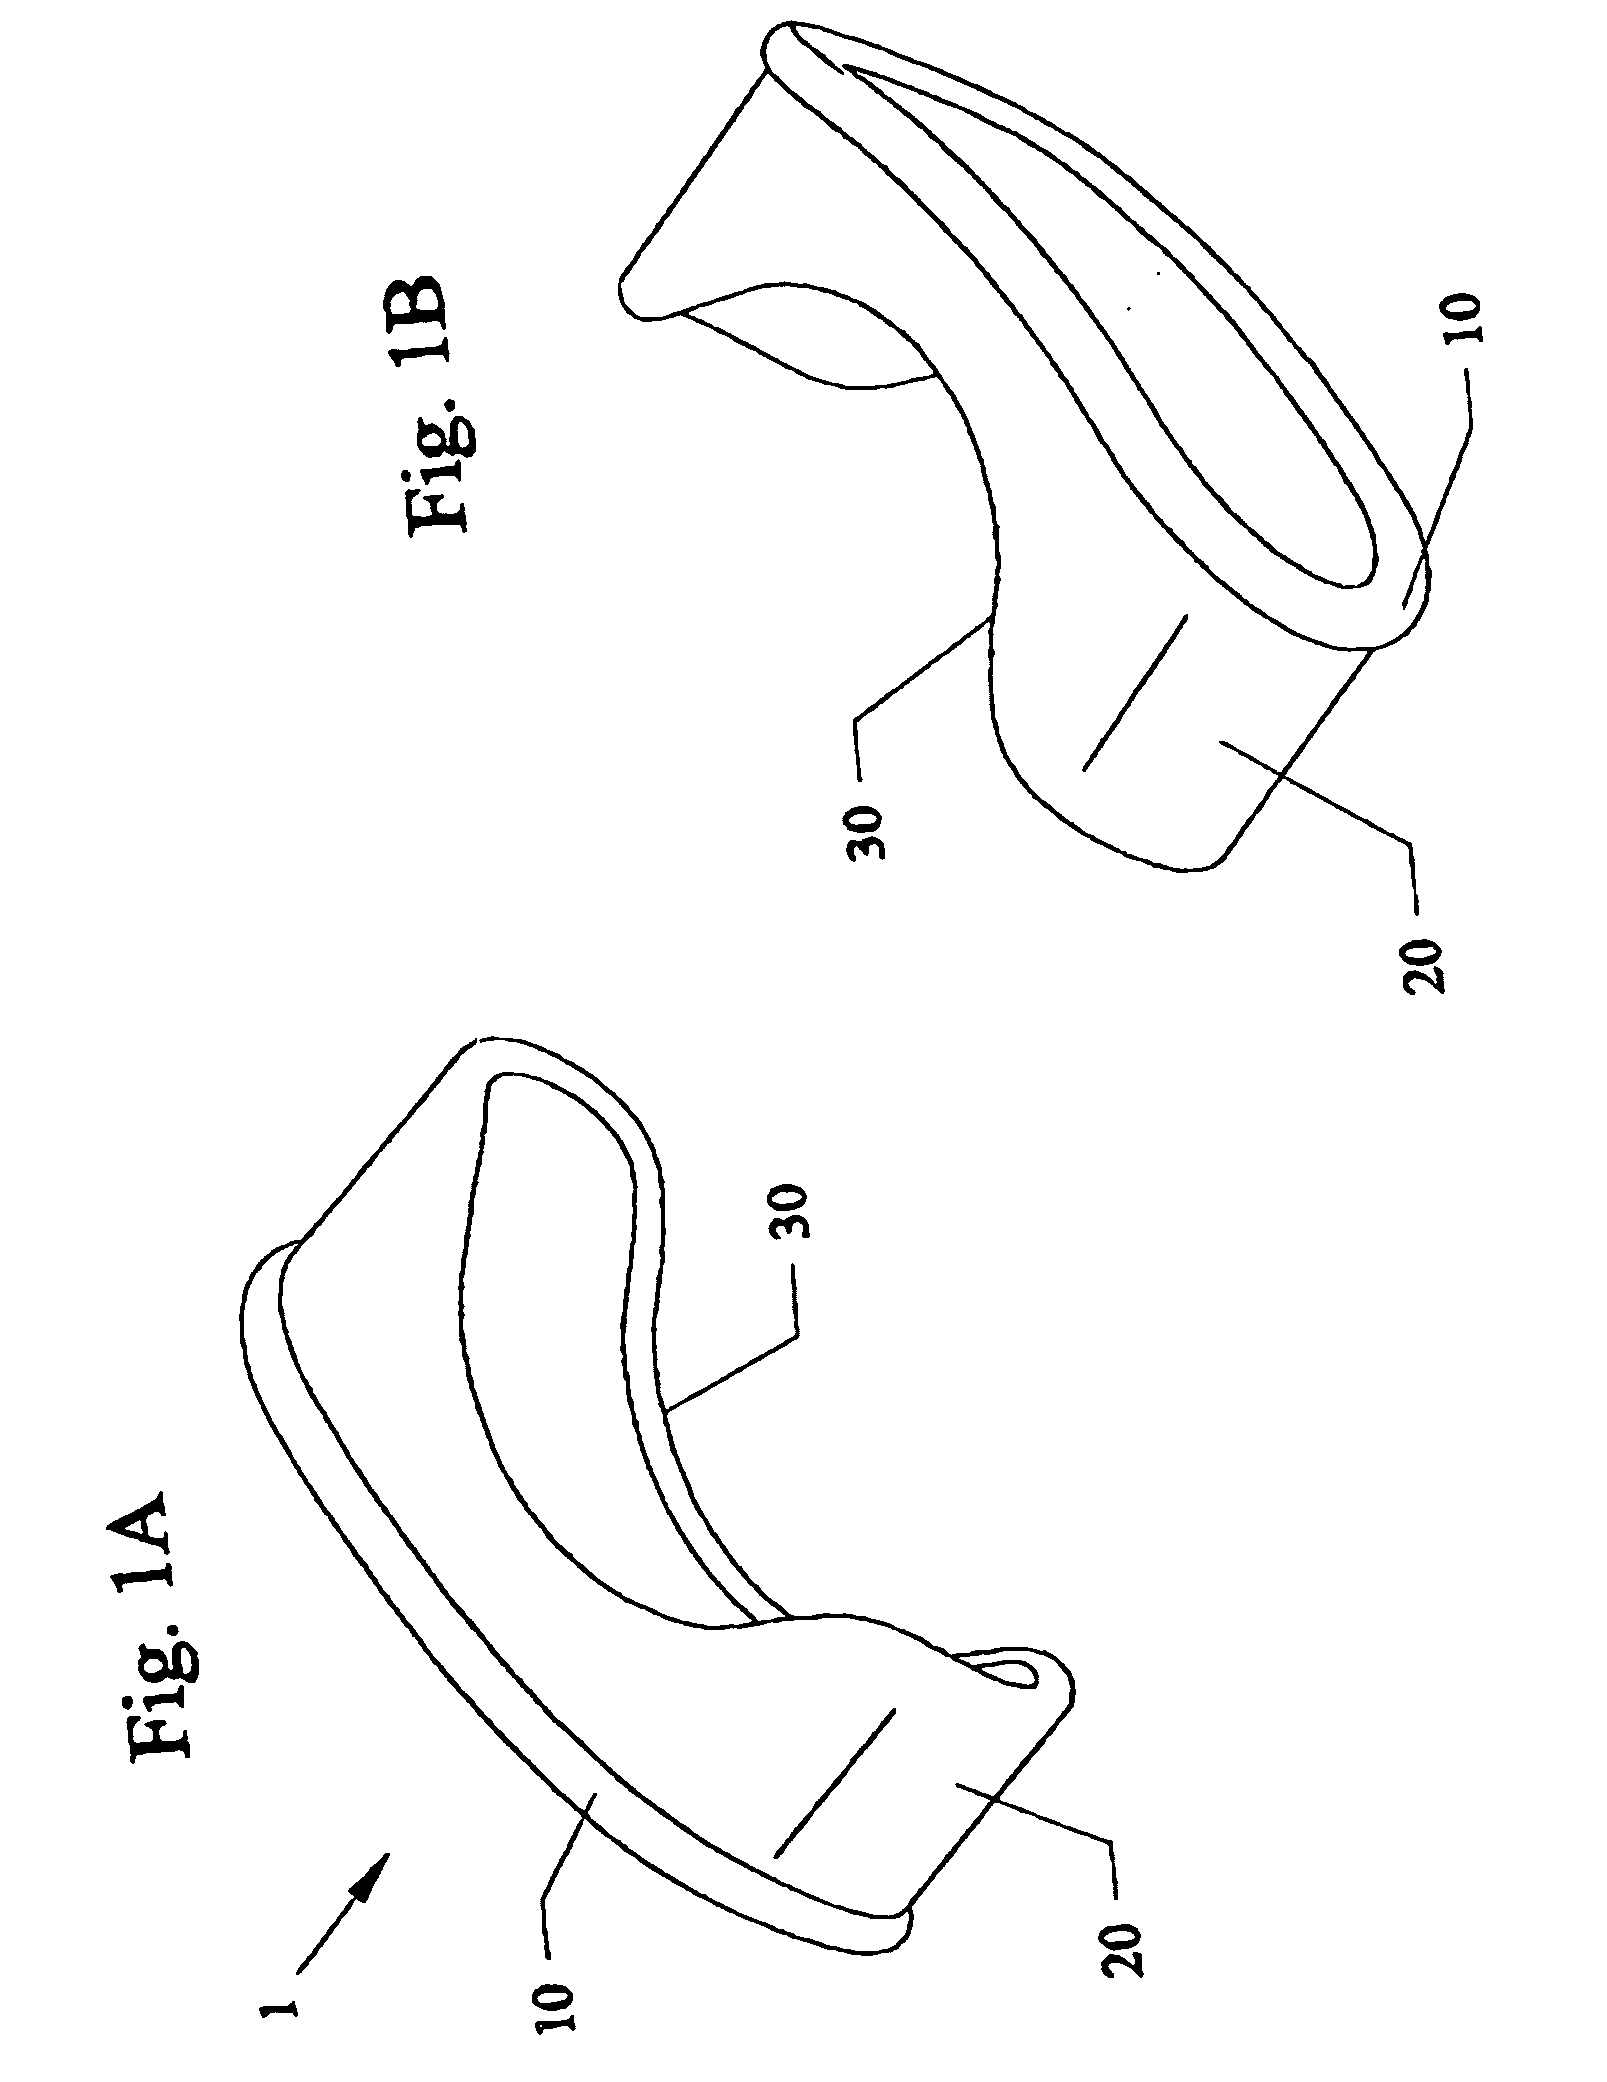 Mouthpiece devices and methods to allow UV whitening of teeth